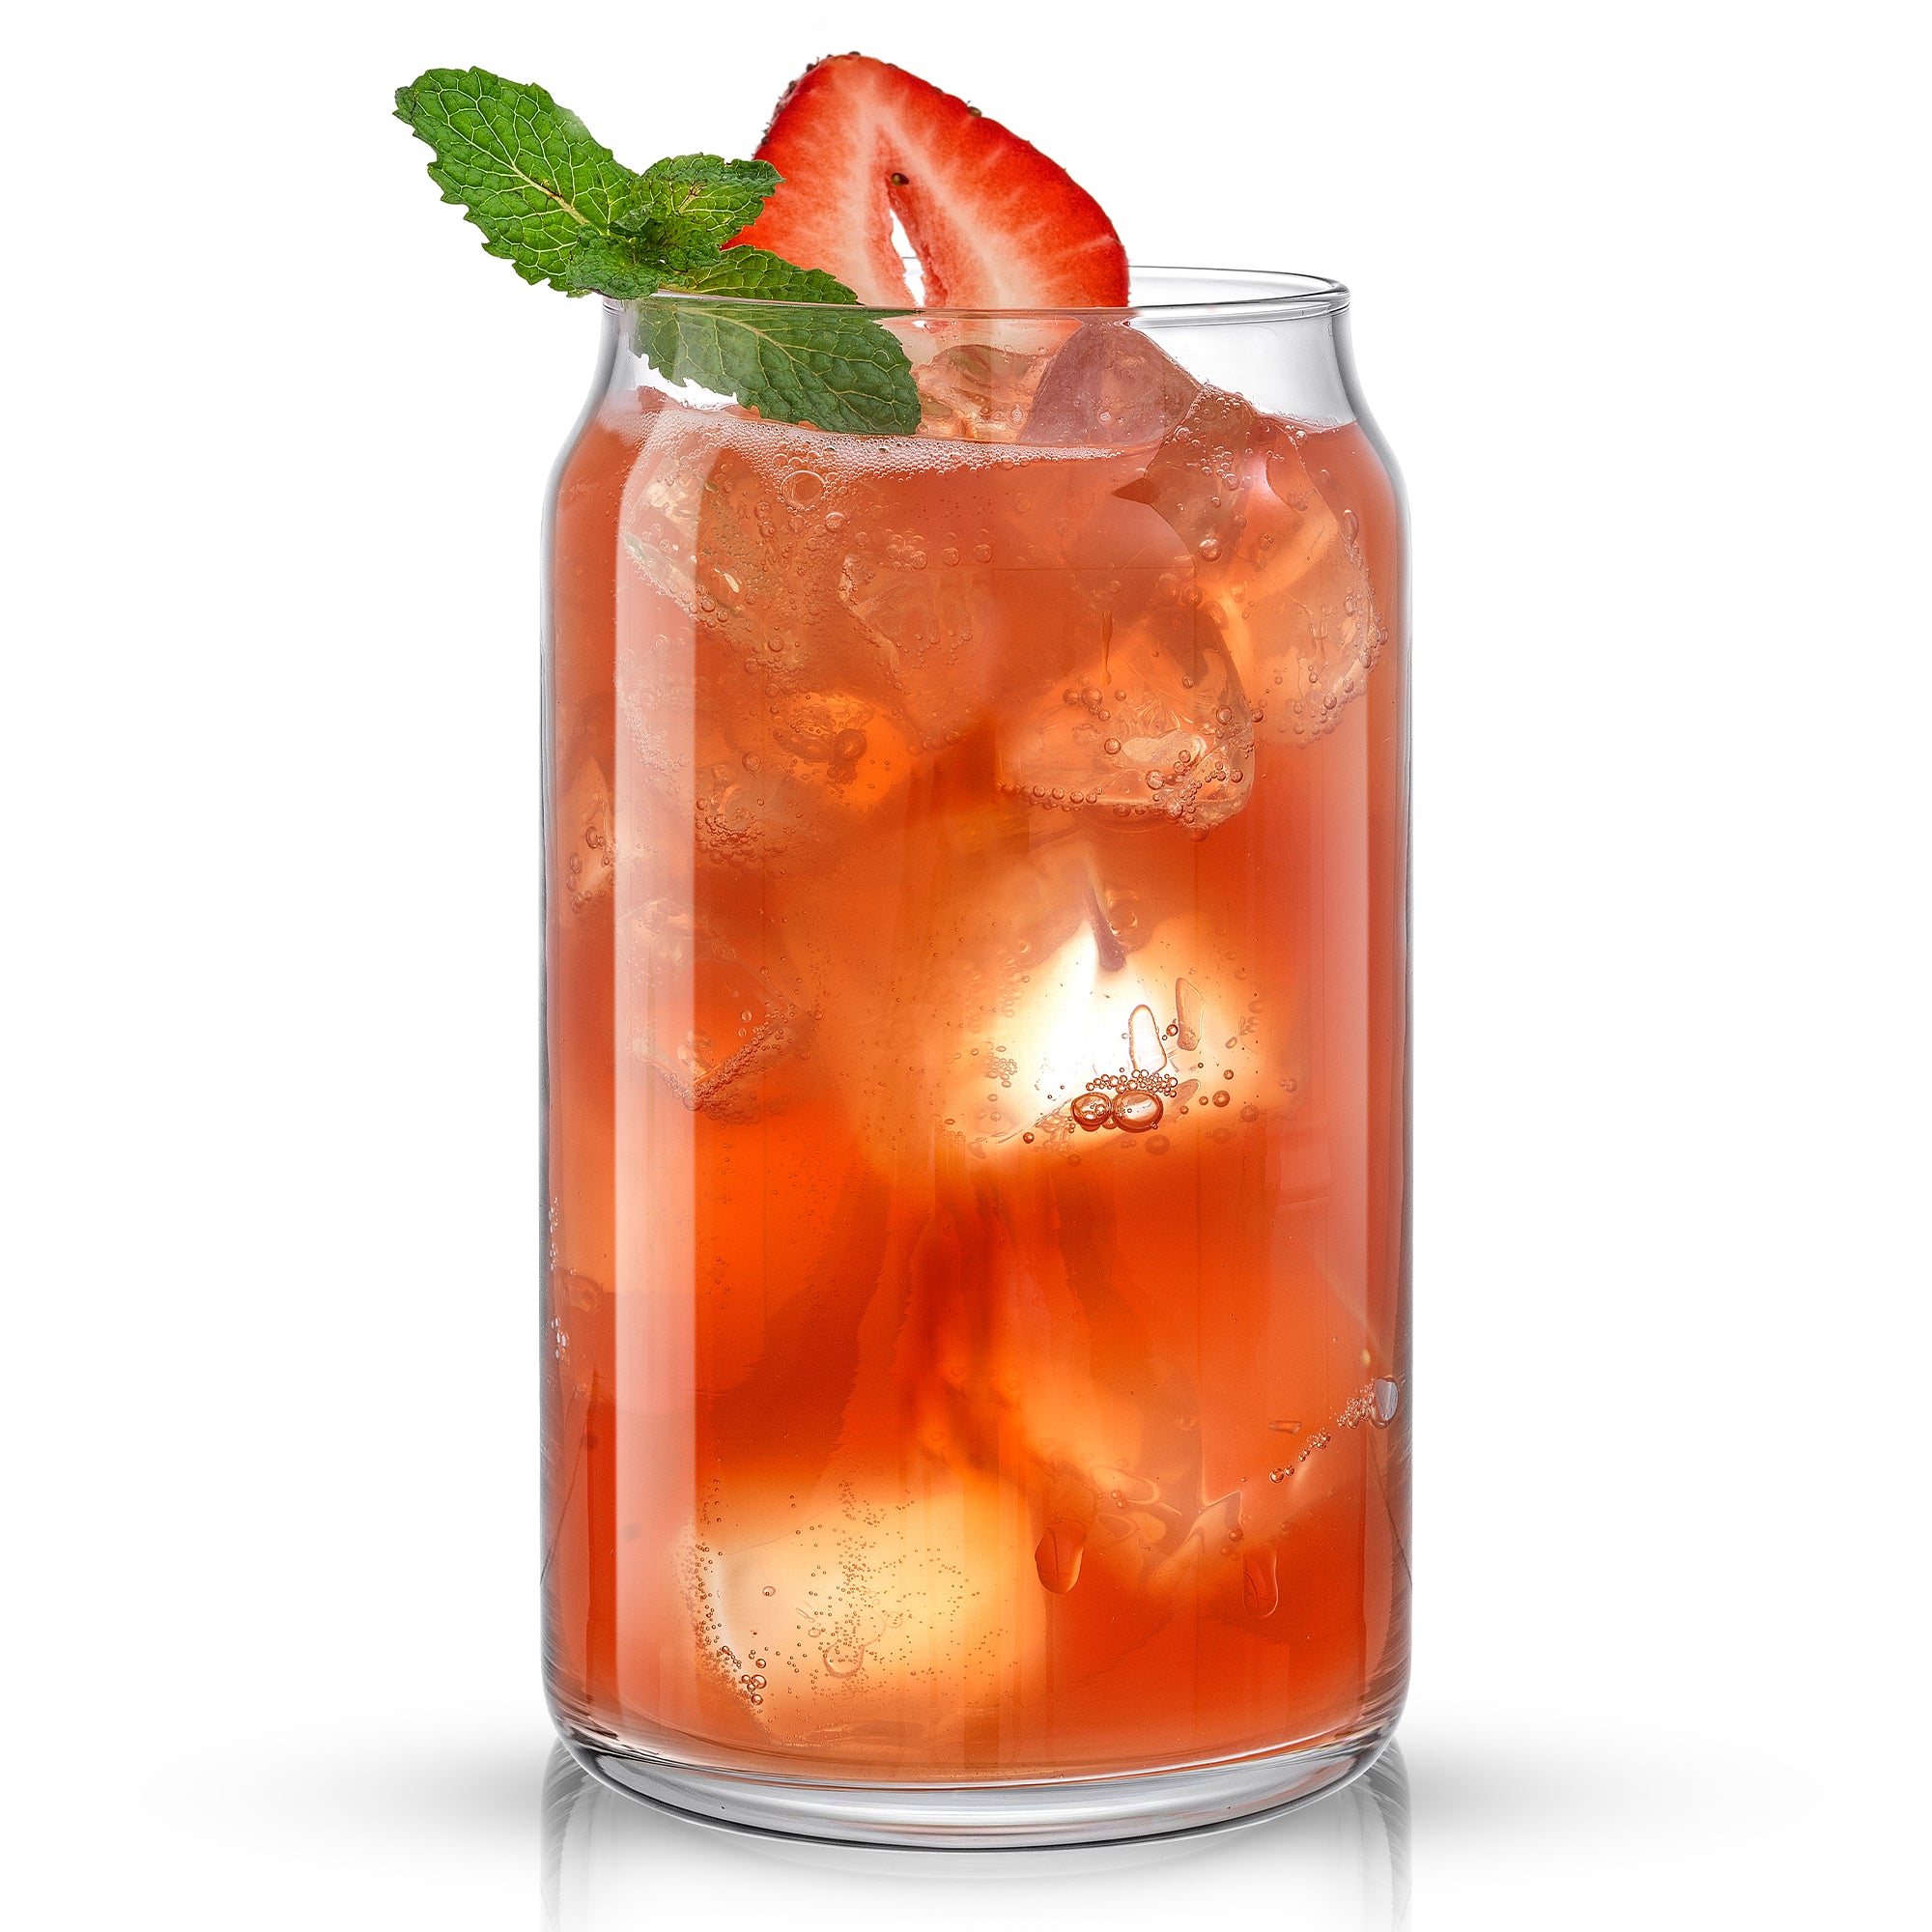 An iced tea with a strawberry garnish served in a JoyJolt Classic Can Glass sits on a white background.